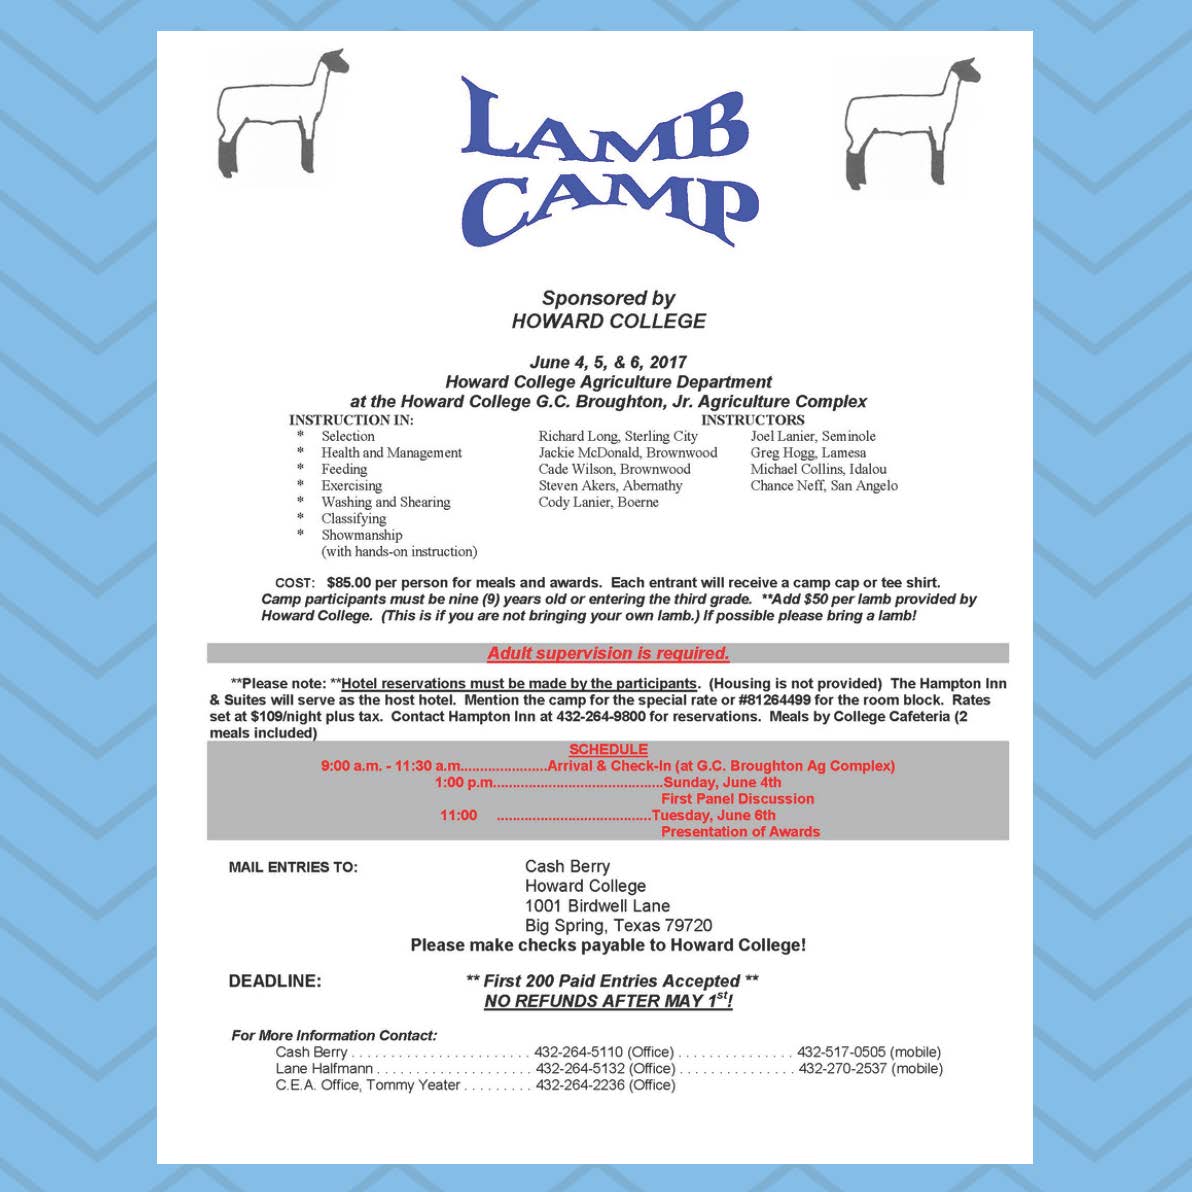 Howard Co_Lamb and Goat Camp_Page_1